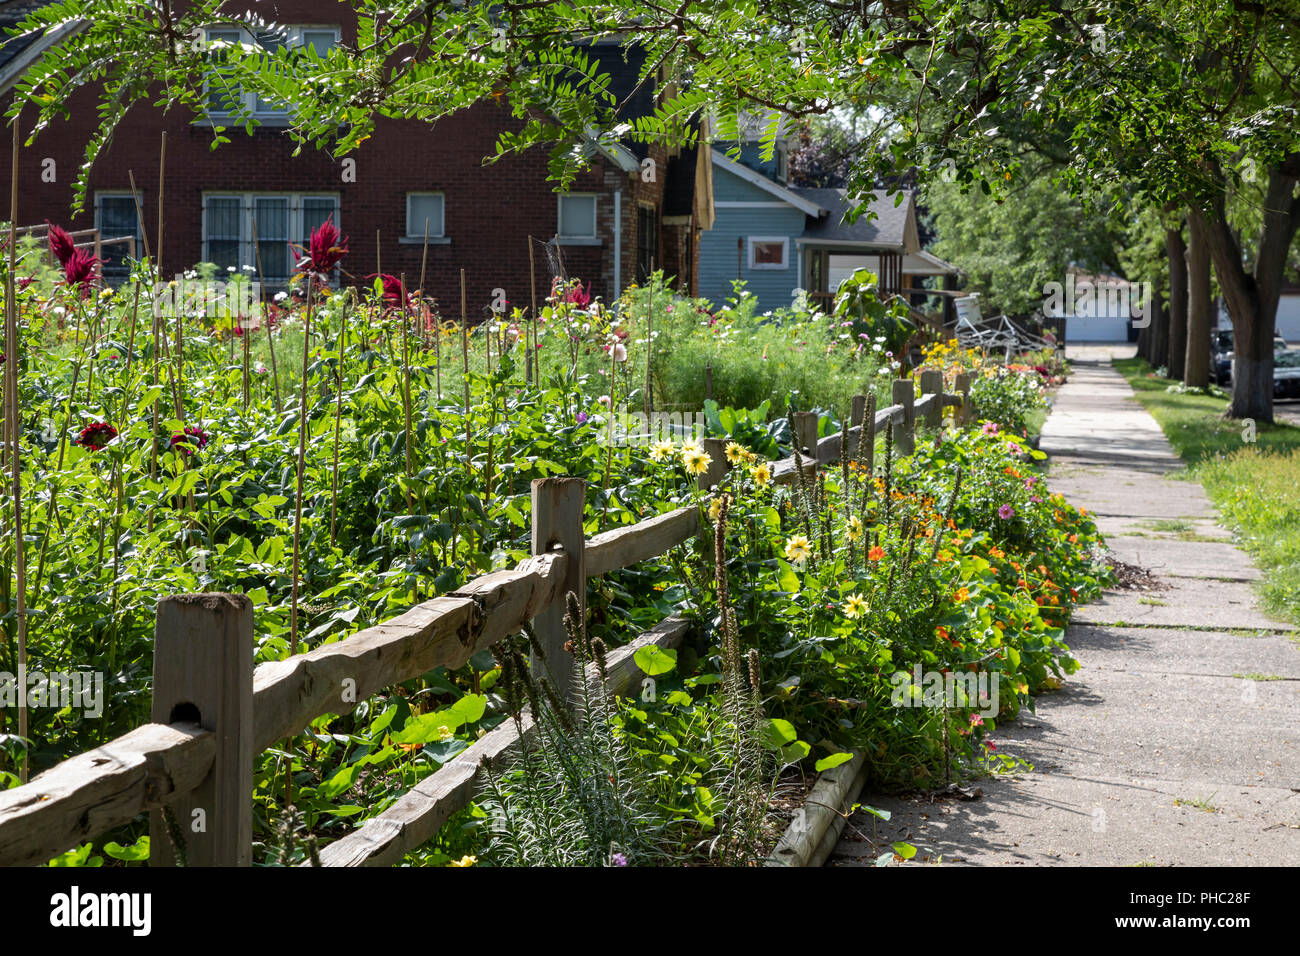 Detroit, Michigan - Detroit Abloom, a nonprofit cut flower farm created on vacant land in the Jefferson-Chalmers neighborhood. The city has more than  Stock Photo